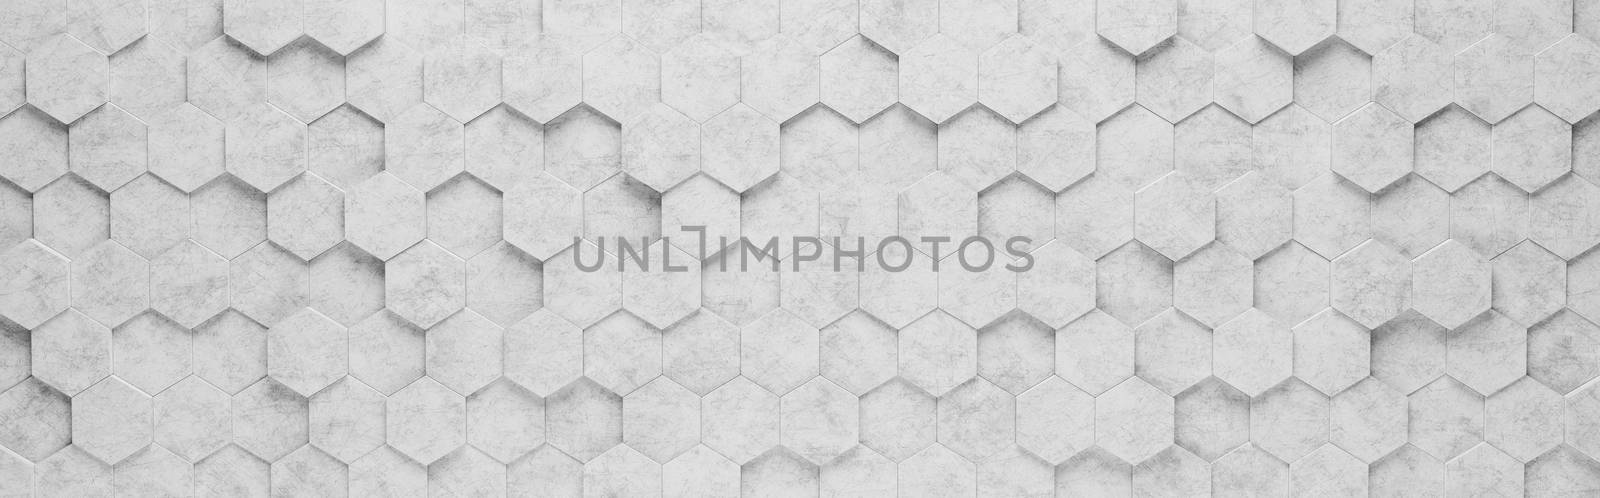 Gray Hexagon Tiles 3D Pattern Background by make